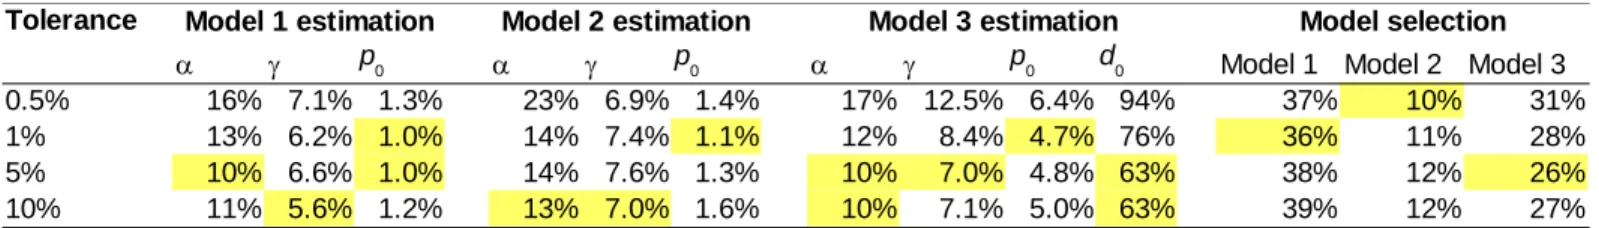 Table S1: Relative estimation and model selection errors calculated by cross-validation, as a function of the tolerance level (% of accepted simulations)